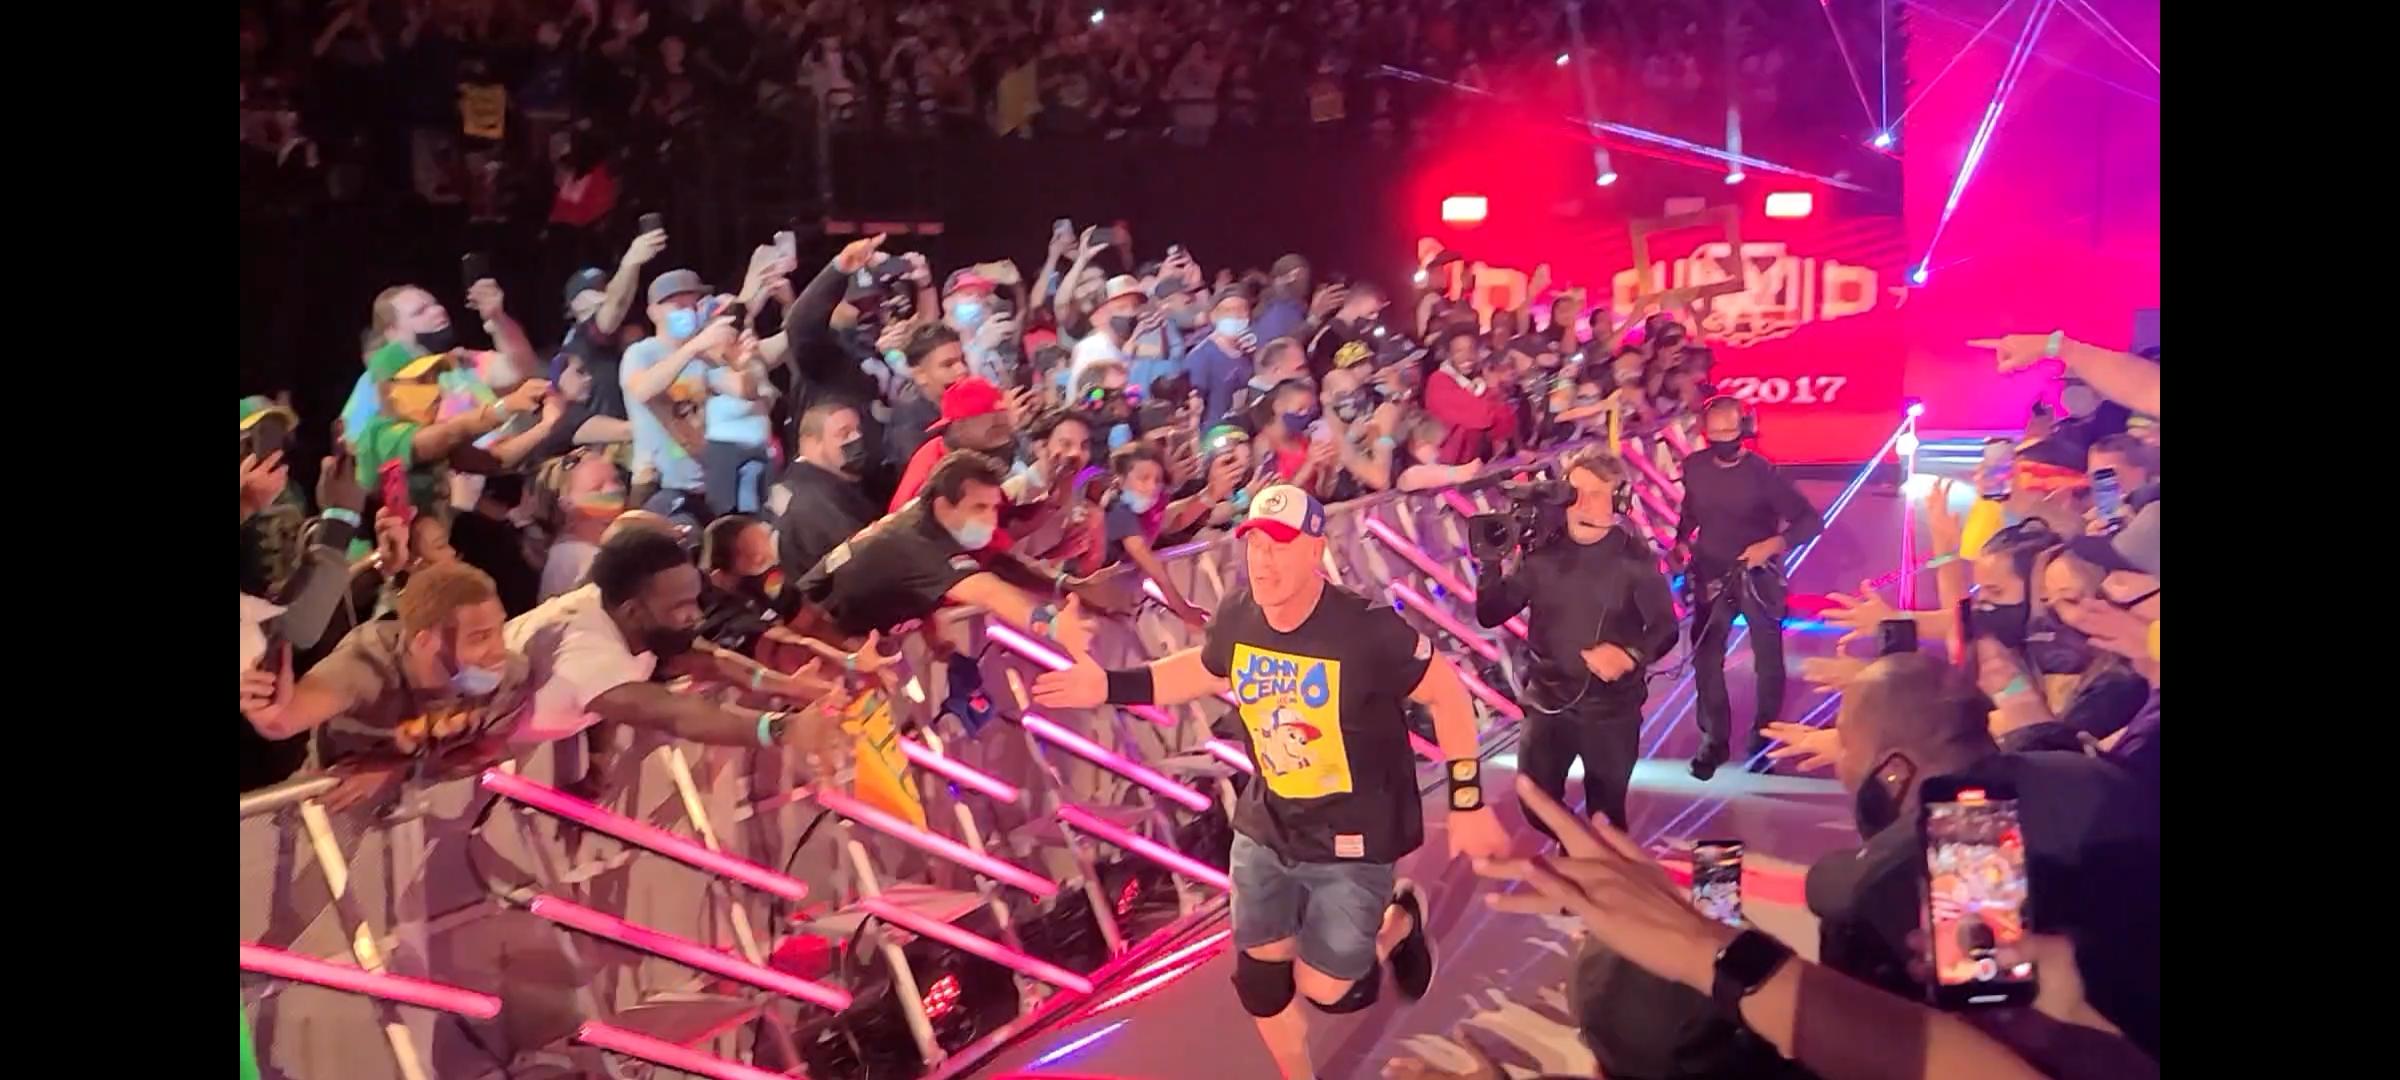 1st WWE Summer Slam event beer and food credit card system goes totally offline leaving 51 0000 fans unable to drink at reported 3 million loss in Vegas stadium